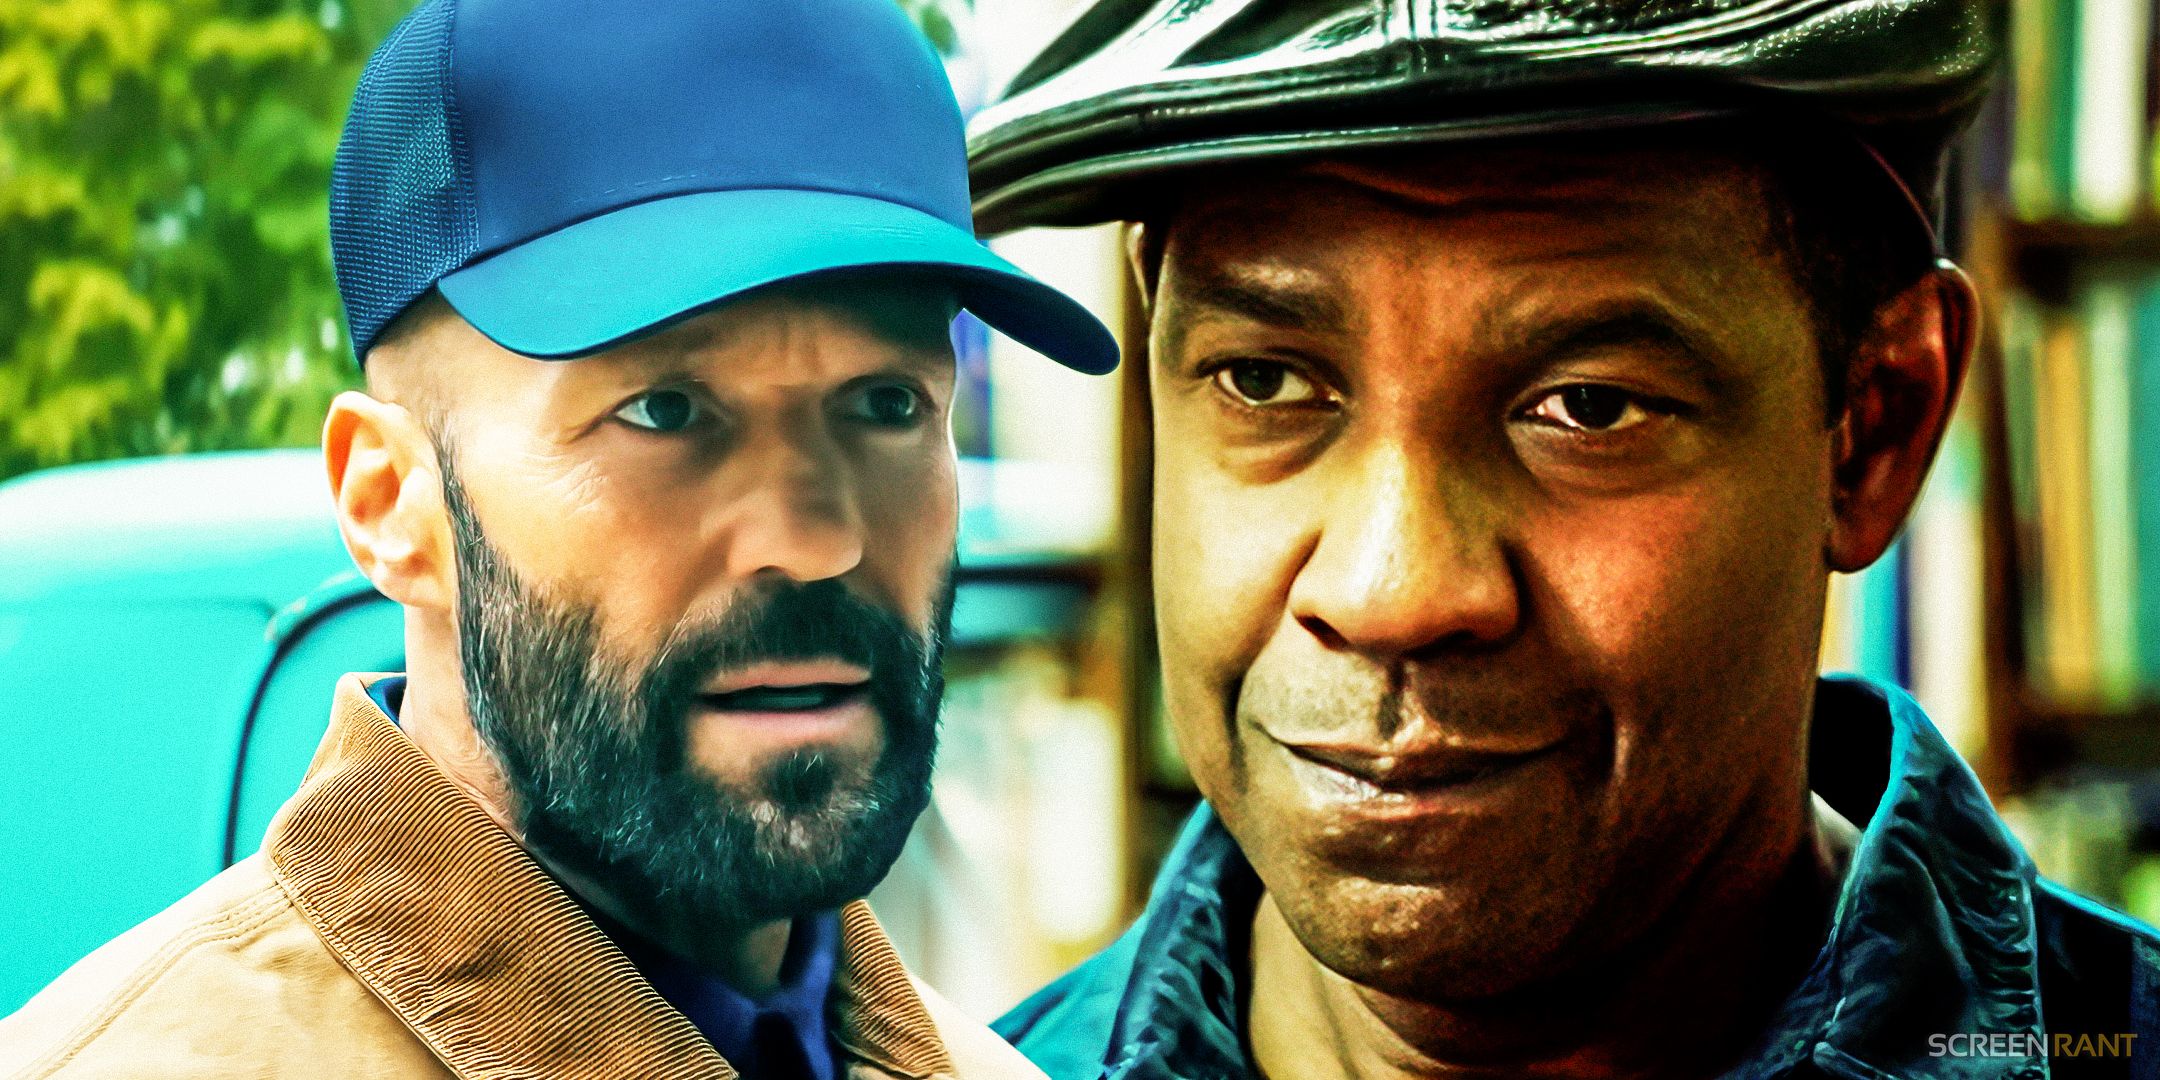 Jason Statham as Adam Clay wearing a cap from The Beekeeper with and Denzel Washington's McCall smiling in 2018's The Equalizer 2